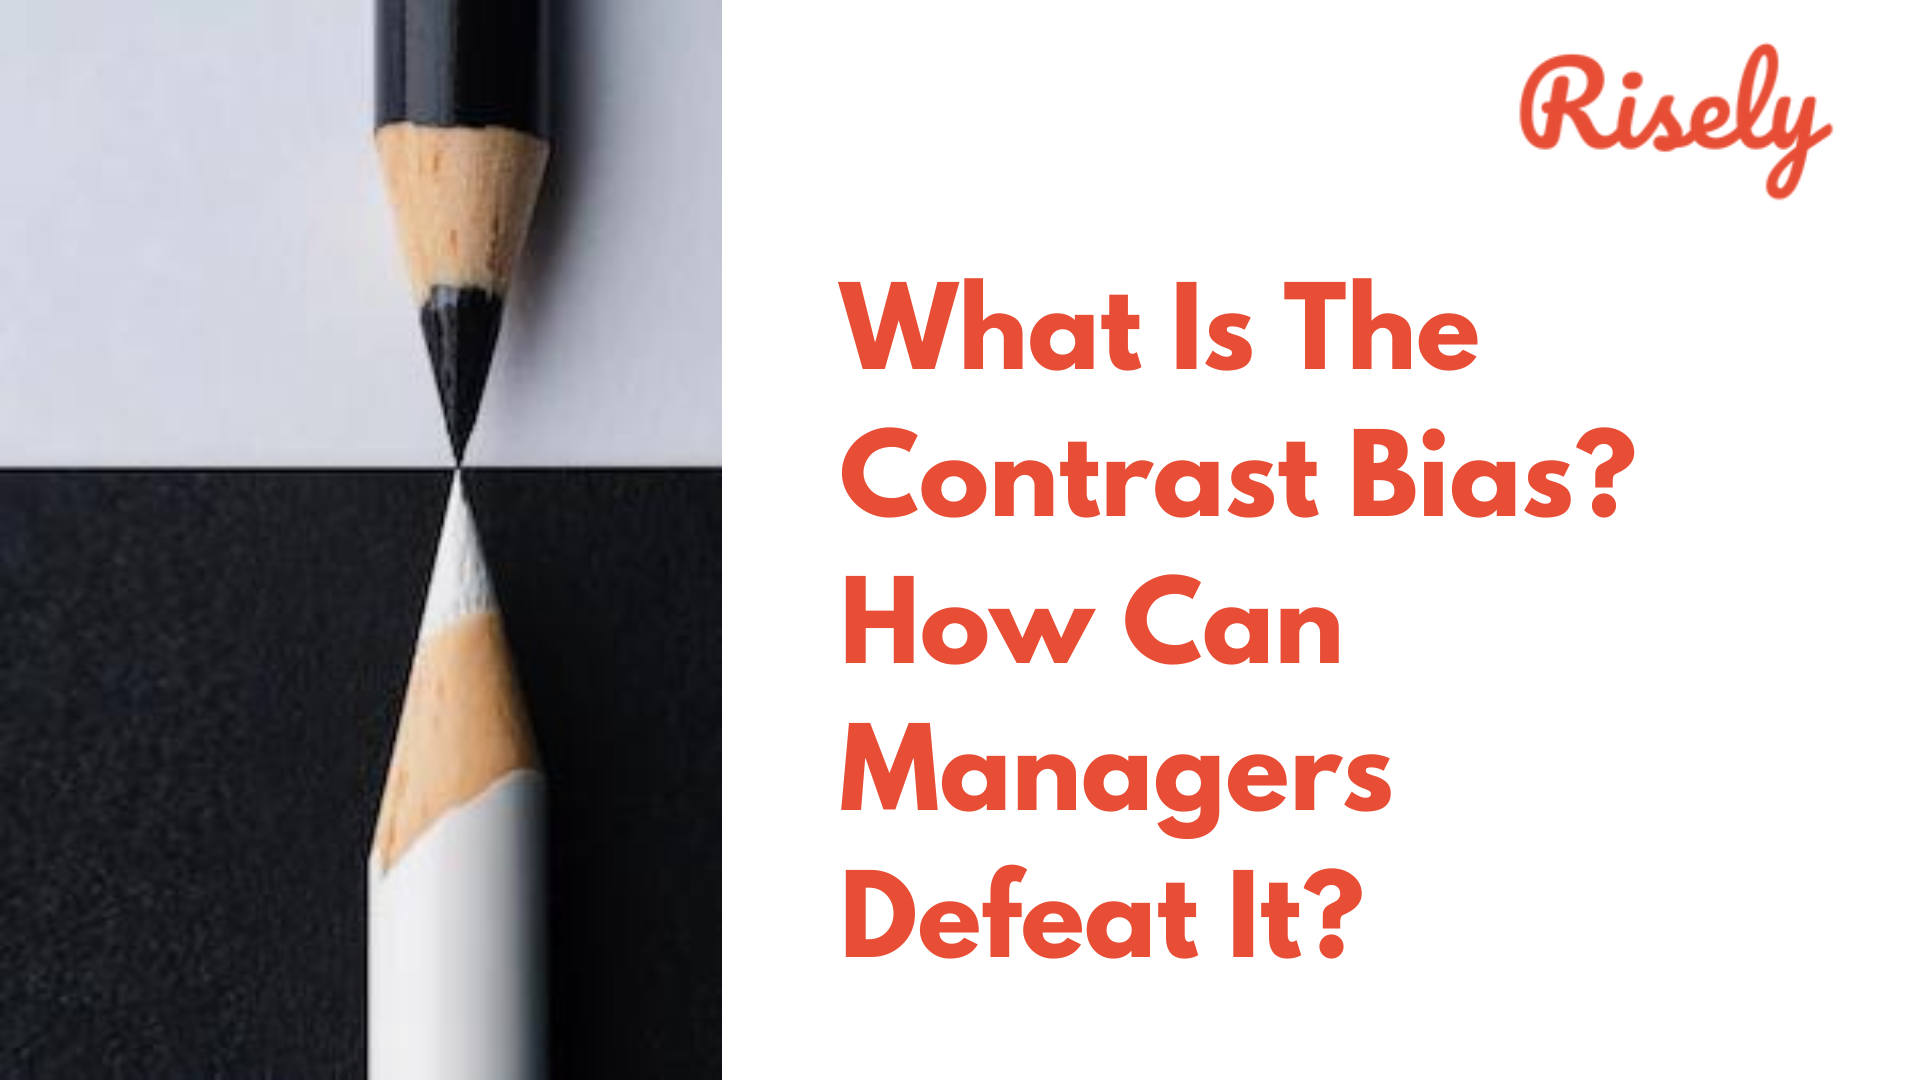 What Is The Contrast Bias? How Can Managers Defeat It?